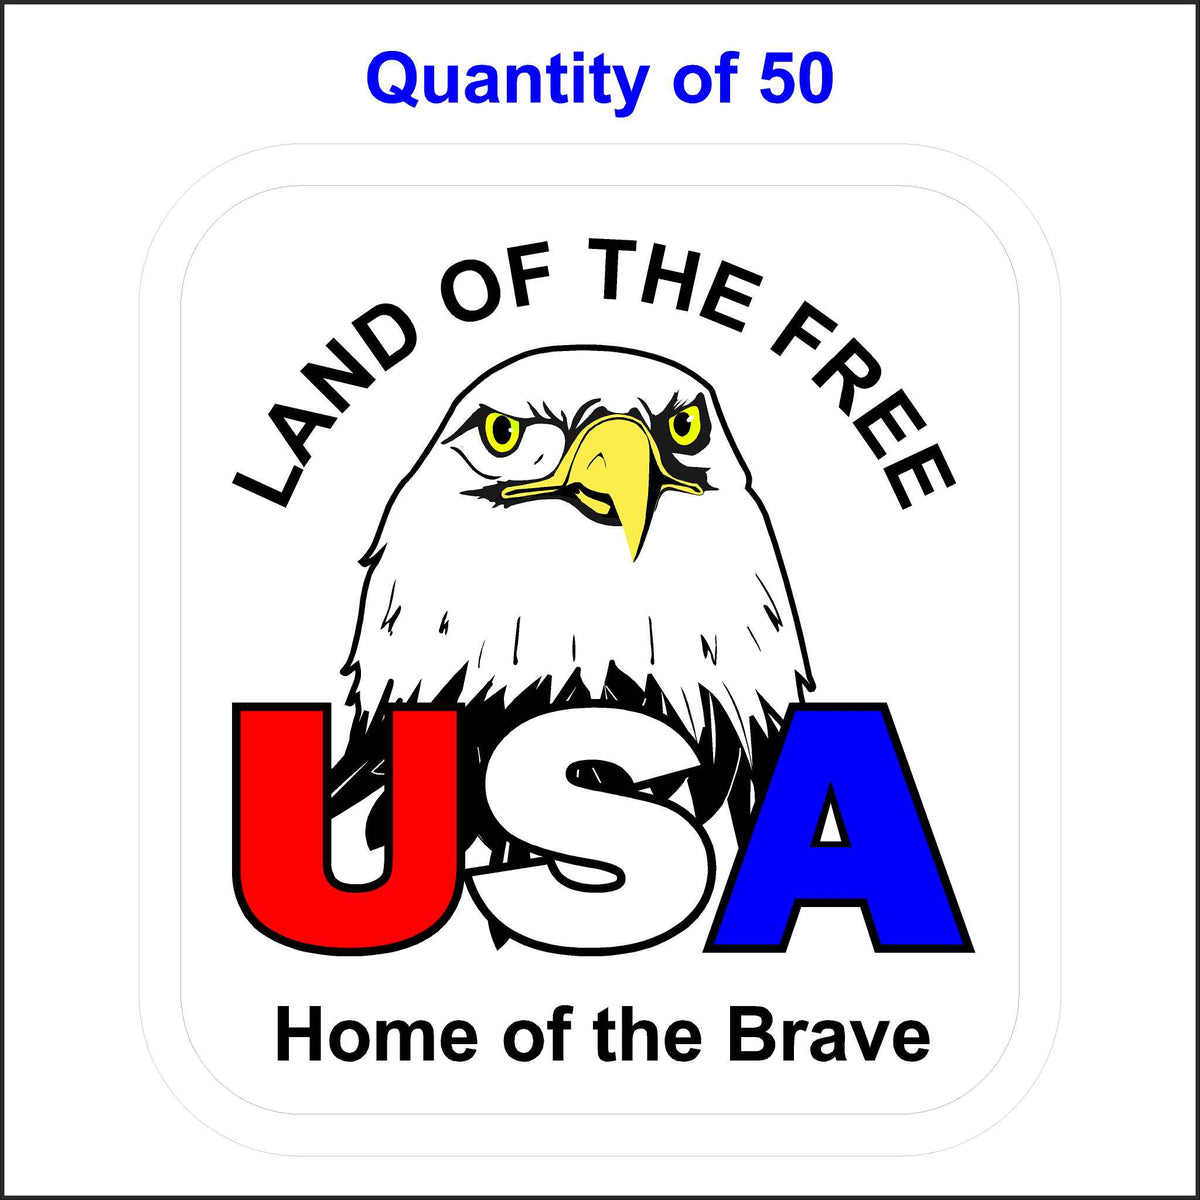 USA Land of the Free Home of the Brave Patriotic Sticker. This Sticker Has and Eagle and in Printed in Red, White, and Blue. 50 Quantity.